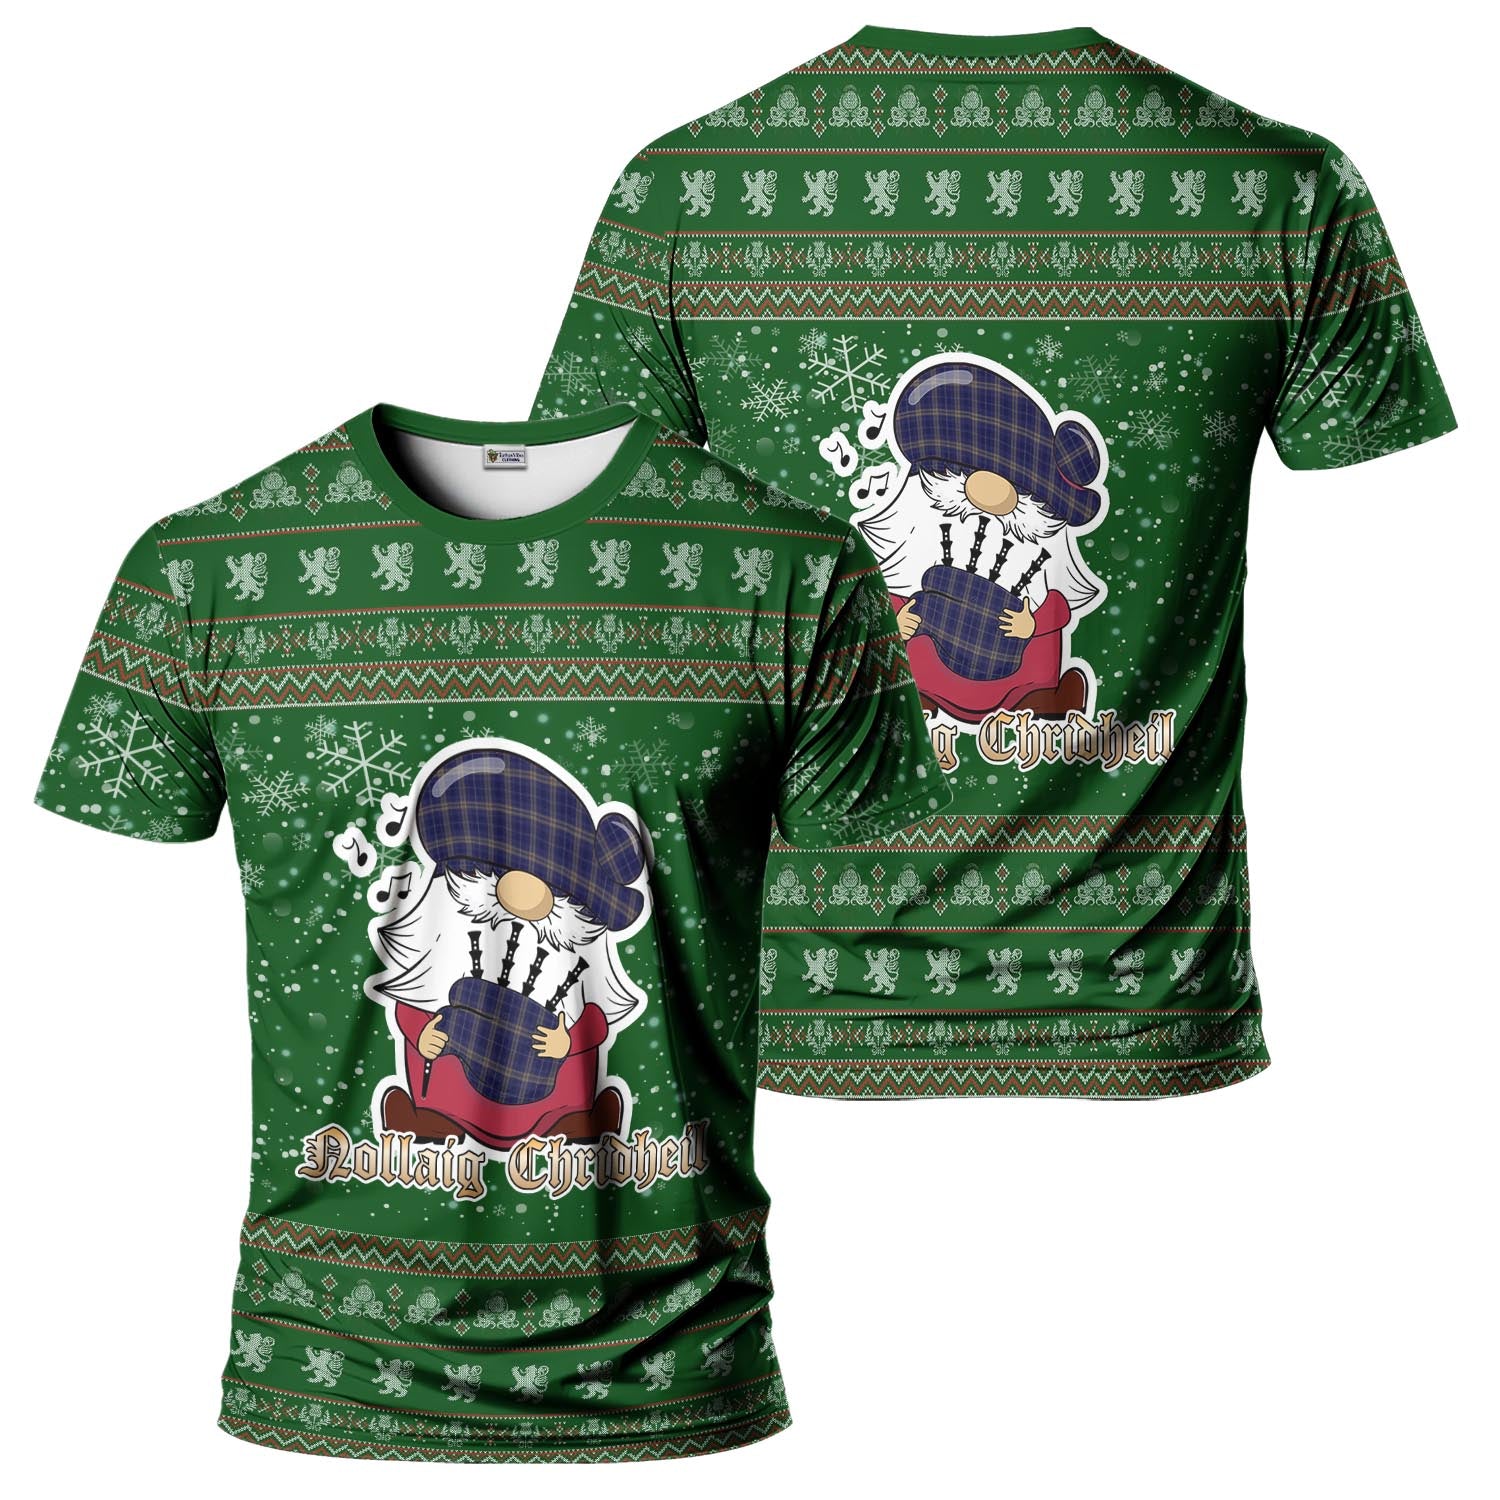 Rhys of Wales Clan Christmas Family T-Shirt with Funny Gnome Playing Bagpipes Men's Shirt Green - Tartanvibesclothing